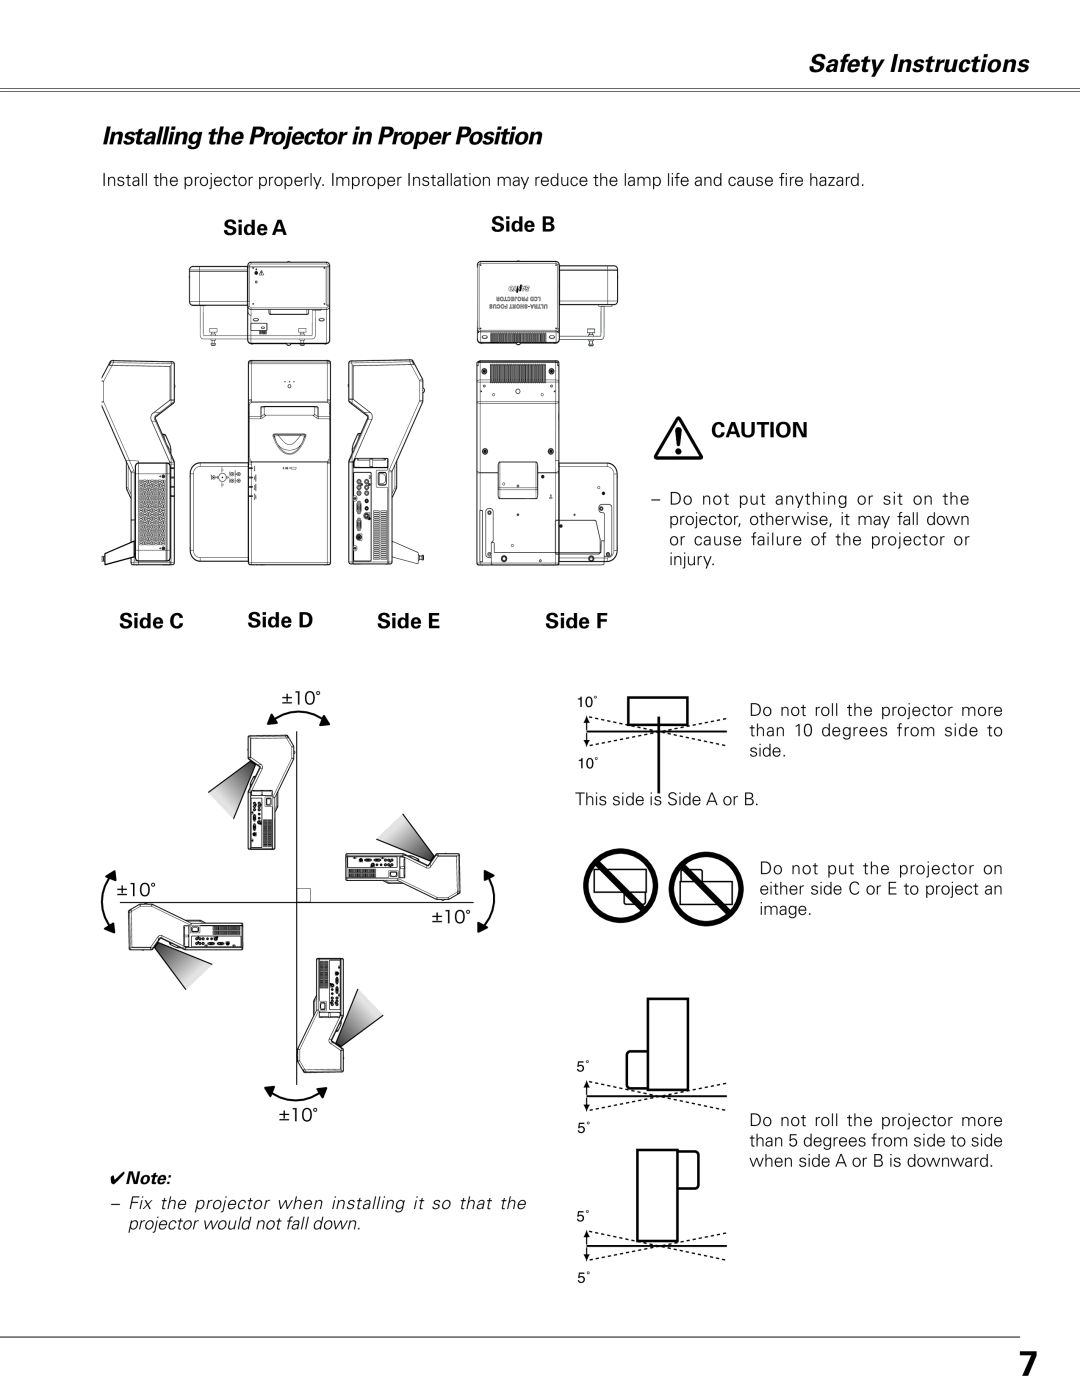 Sanyo PLC-XL50A Safety Instructions, Installing the Projector in Proper Position, Side A, Side C, Side D, Side E 